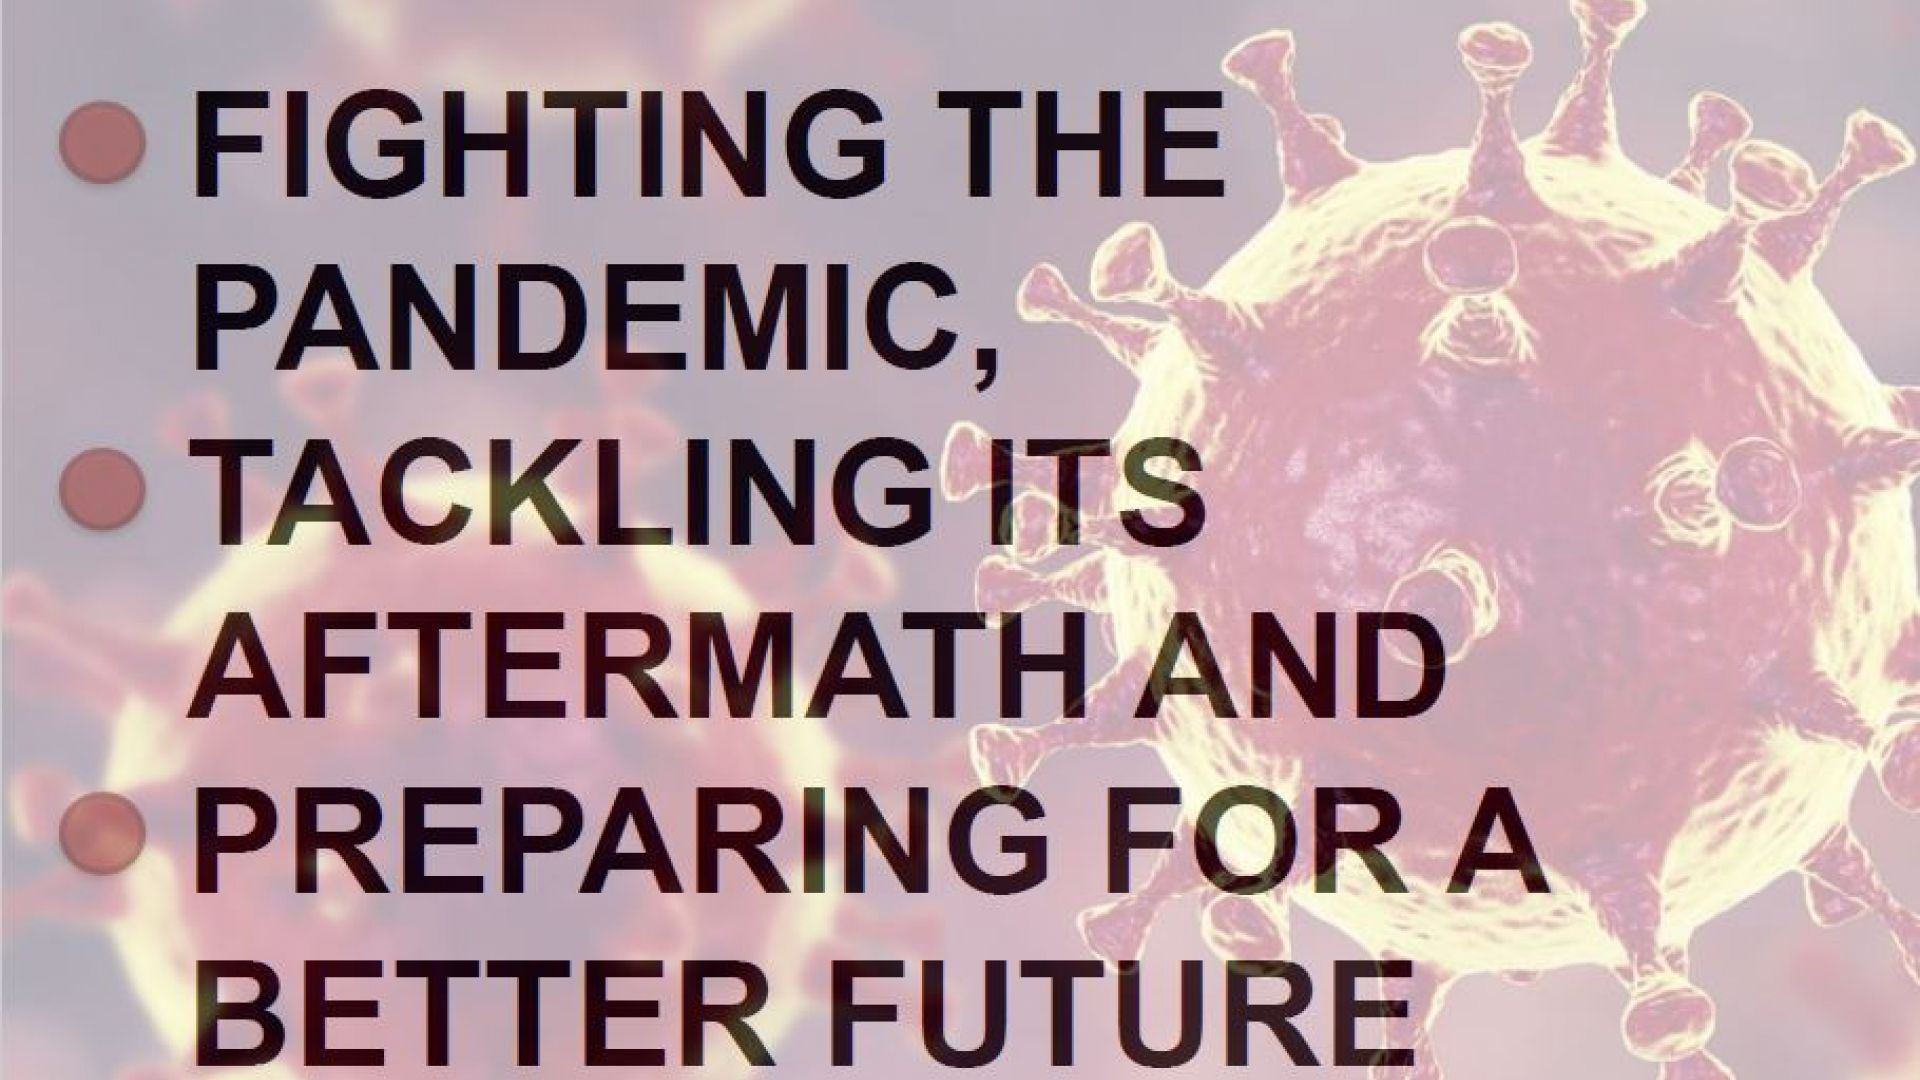 Fighting the pandemic, tackling its aftermath and preparing for a better future.